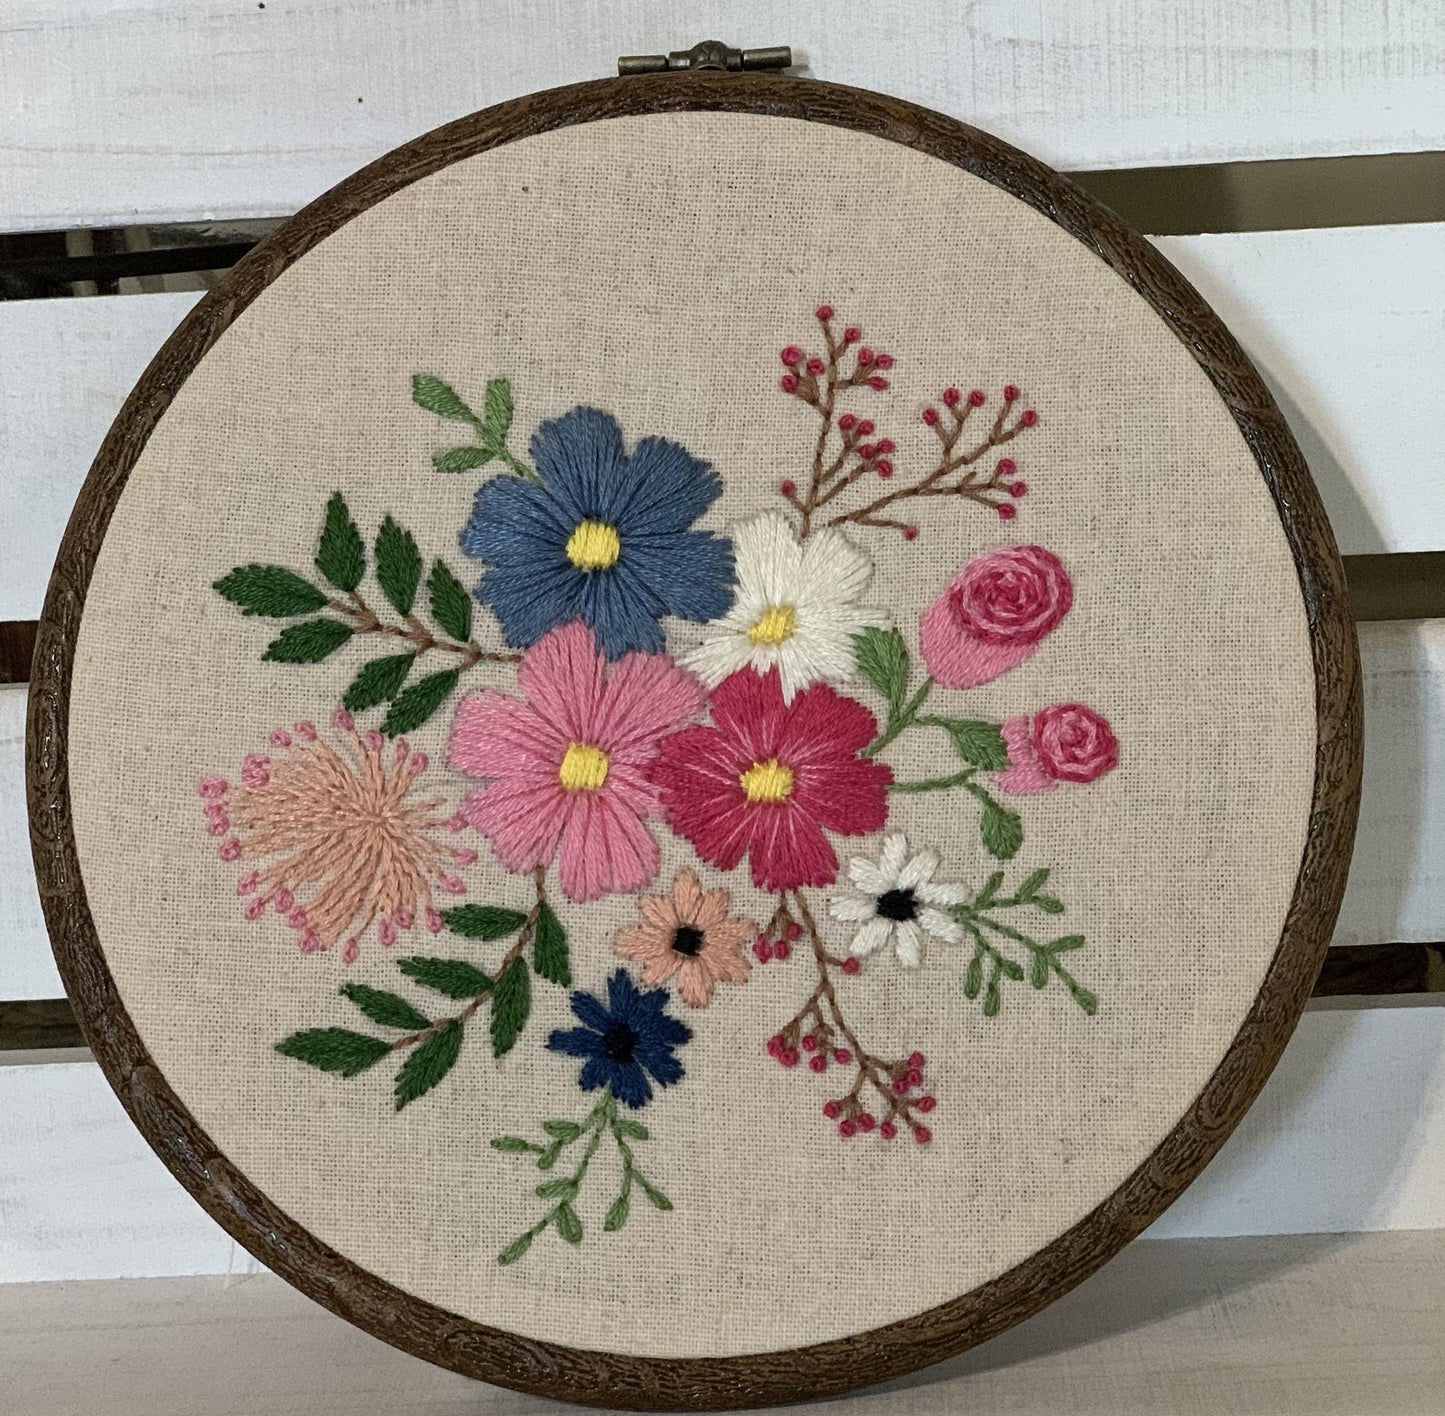 6" Floral Hand Embroidery Pattern PDF Download